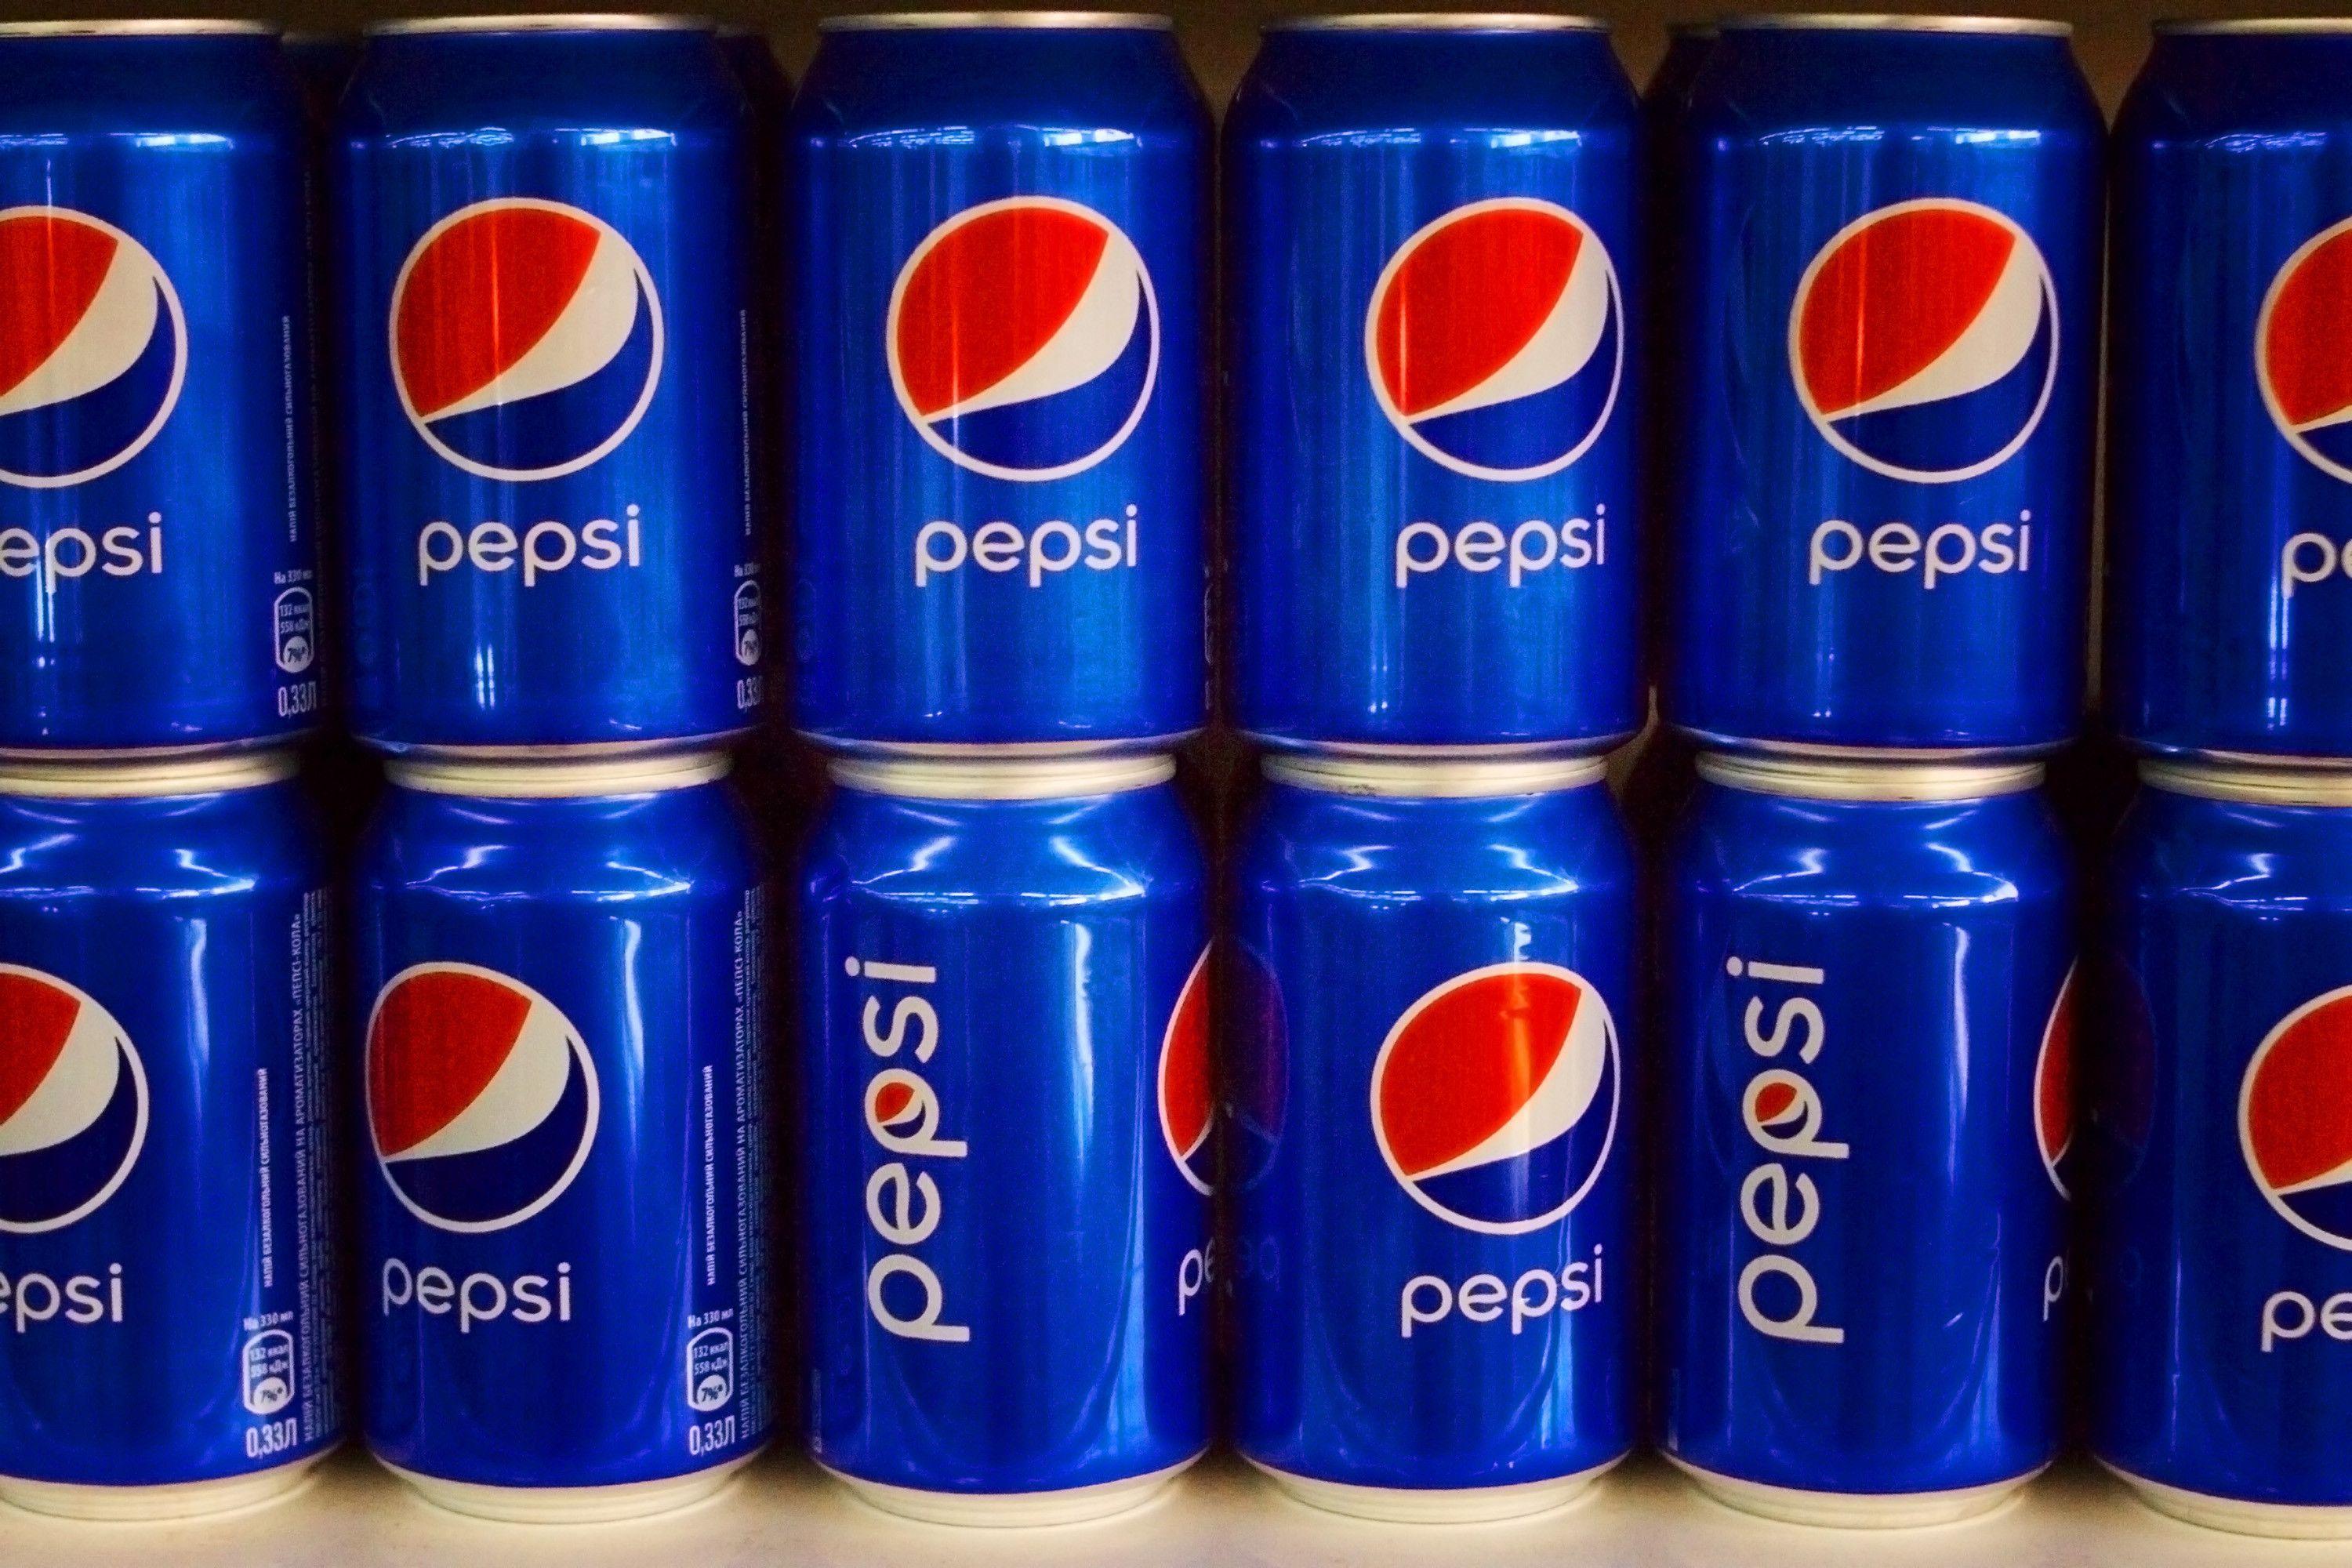 Pepsi Product Logo - Grocery store refuses to sell Pepsi until they remove NFL logo